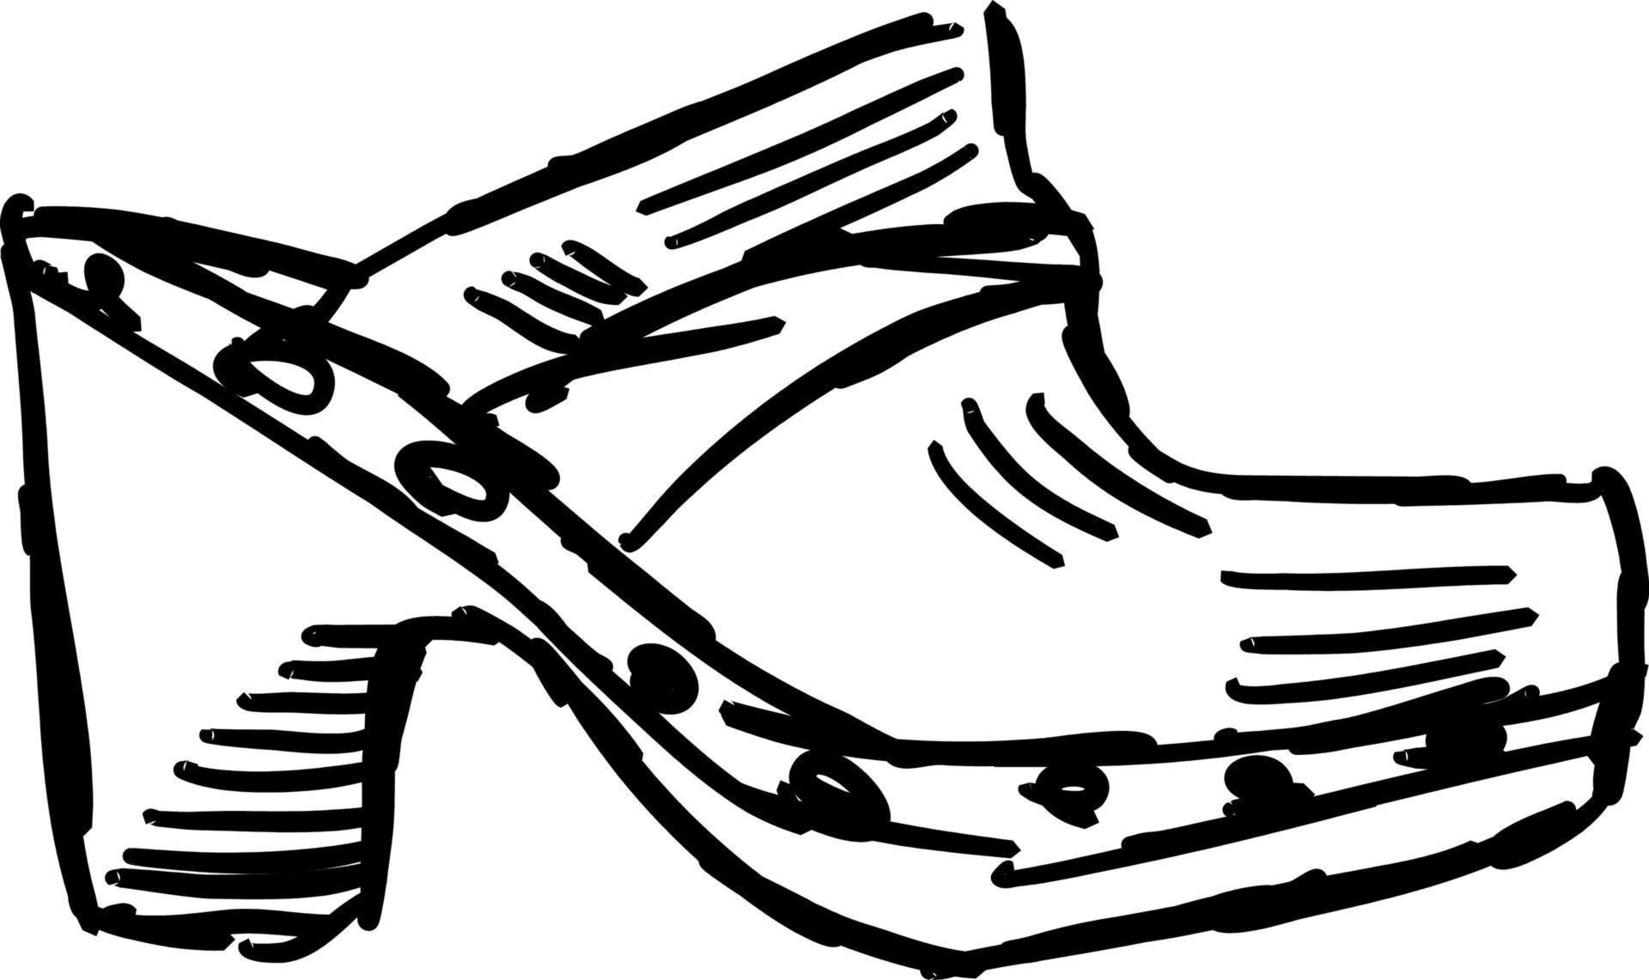 Clogs sketch, illustration, vector on white background.